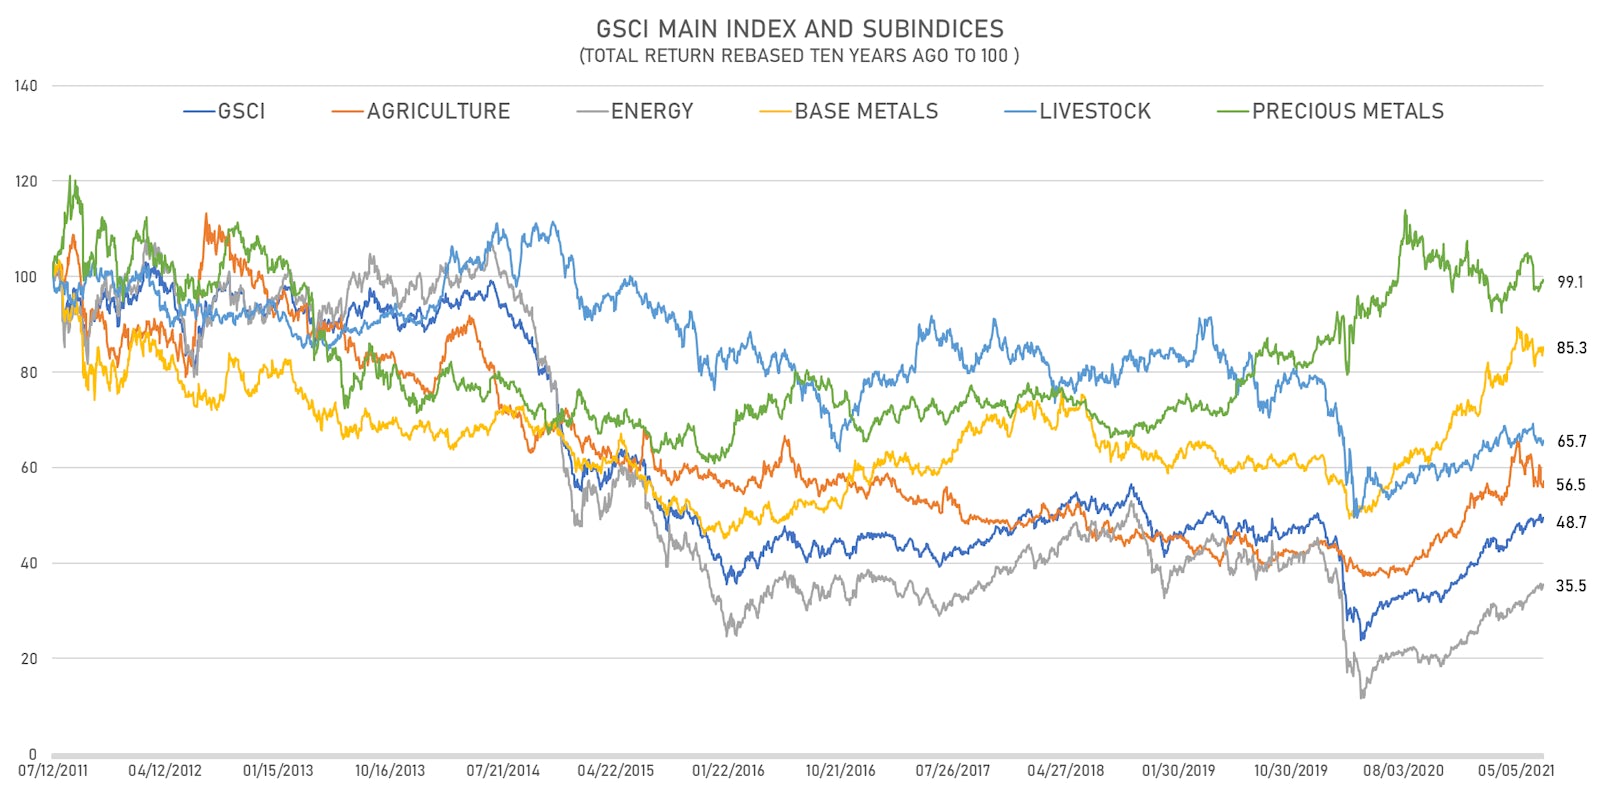 GSCI Main And Sub-Indices Over The Last 10 Years | Sources: ϕpost, FactSet data